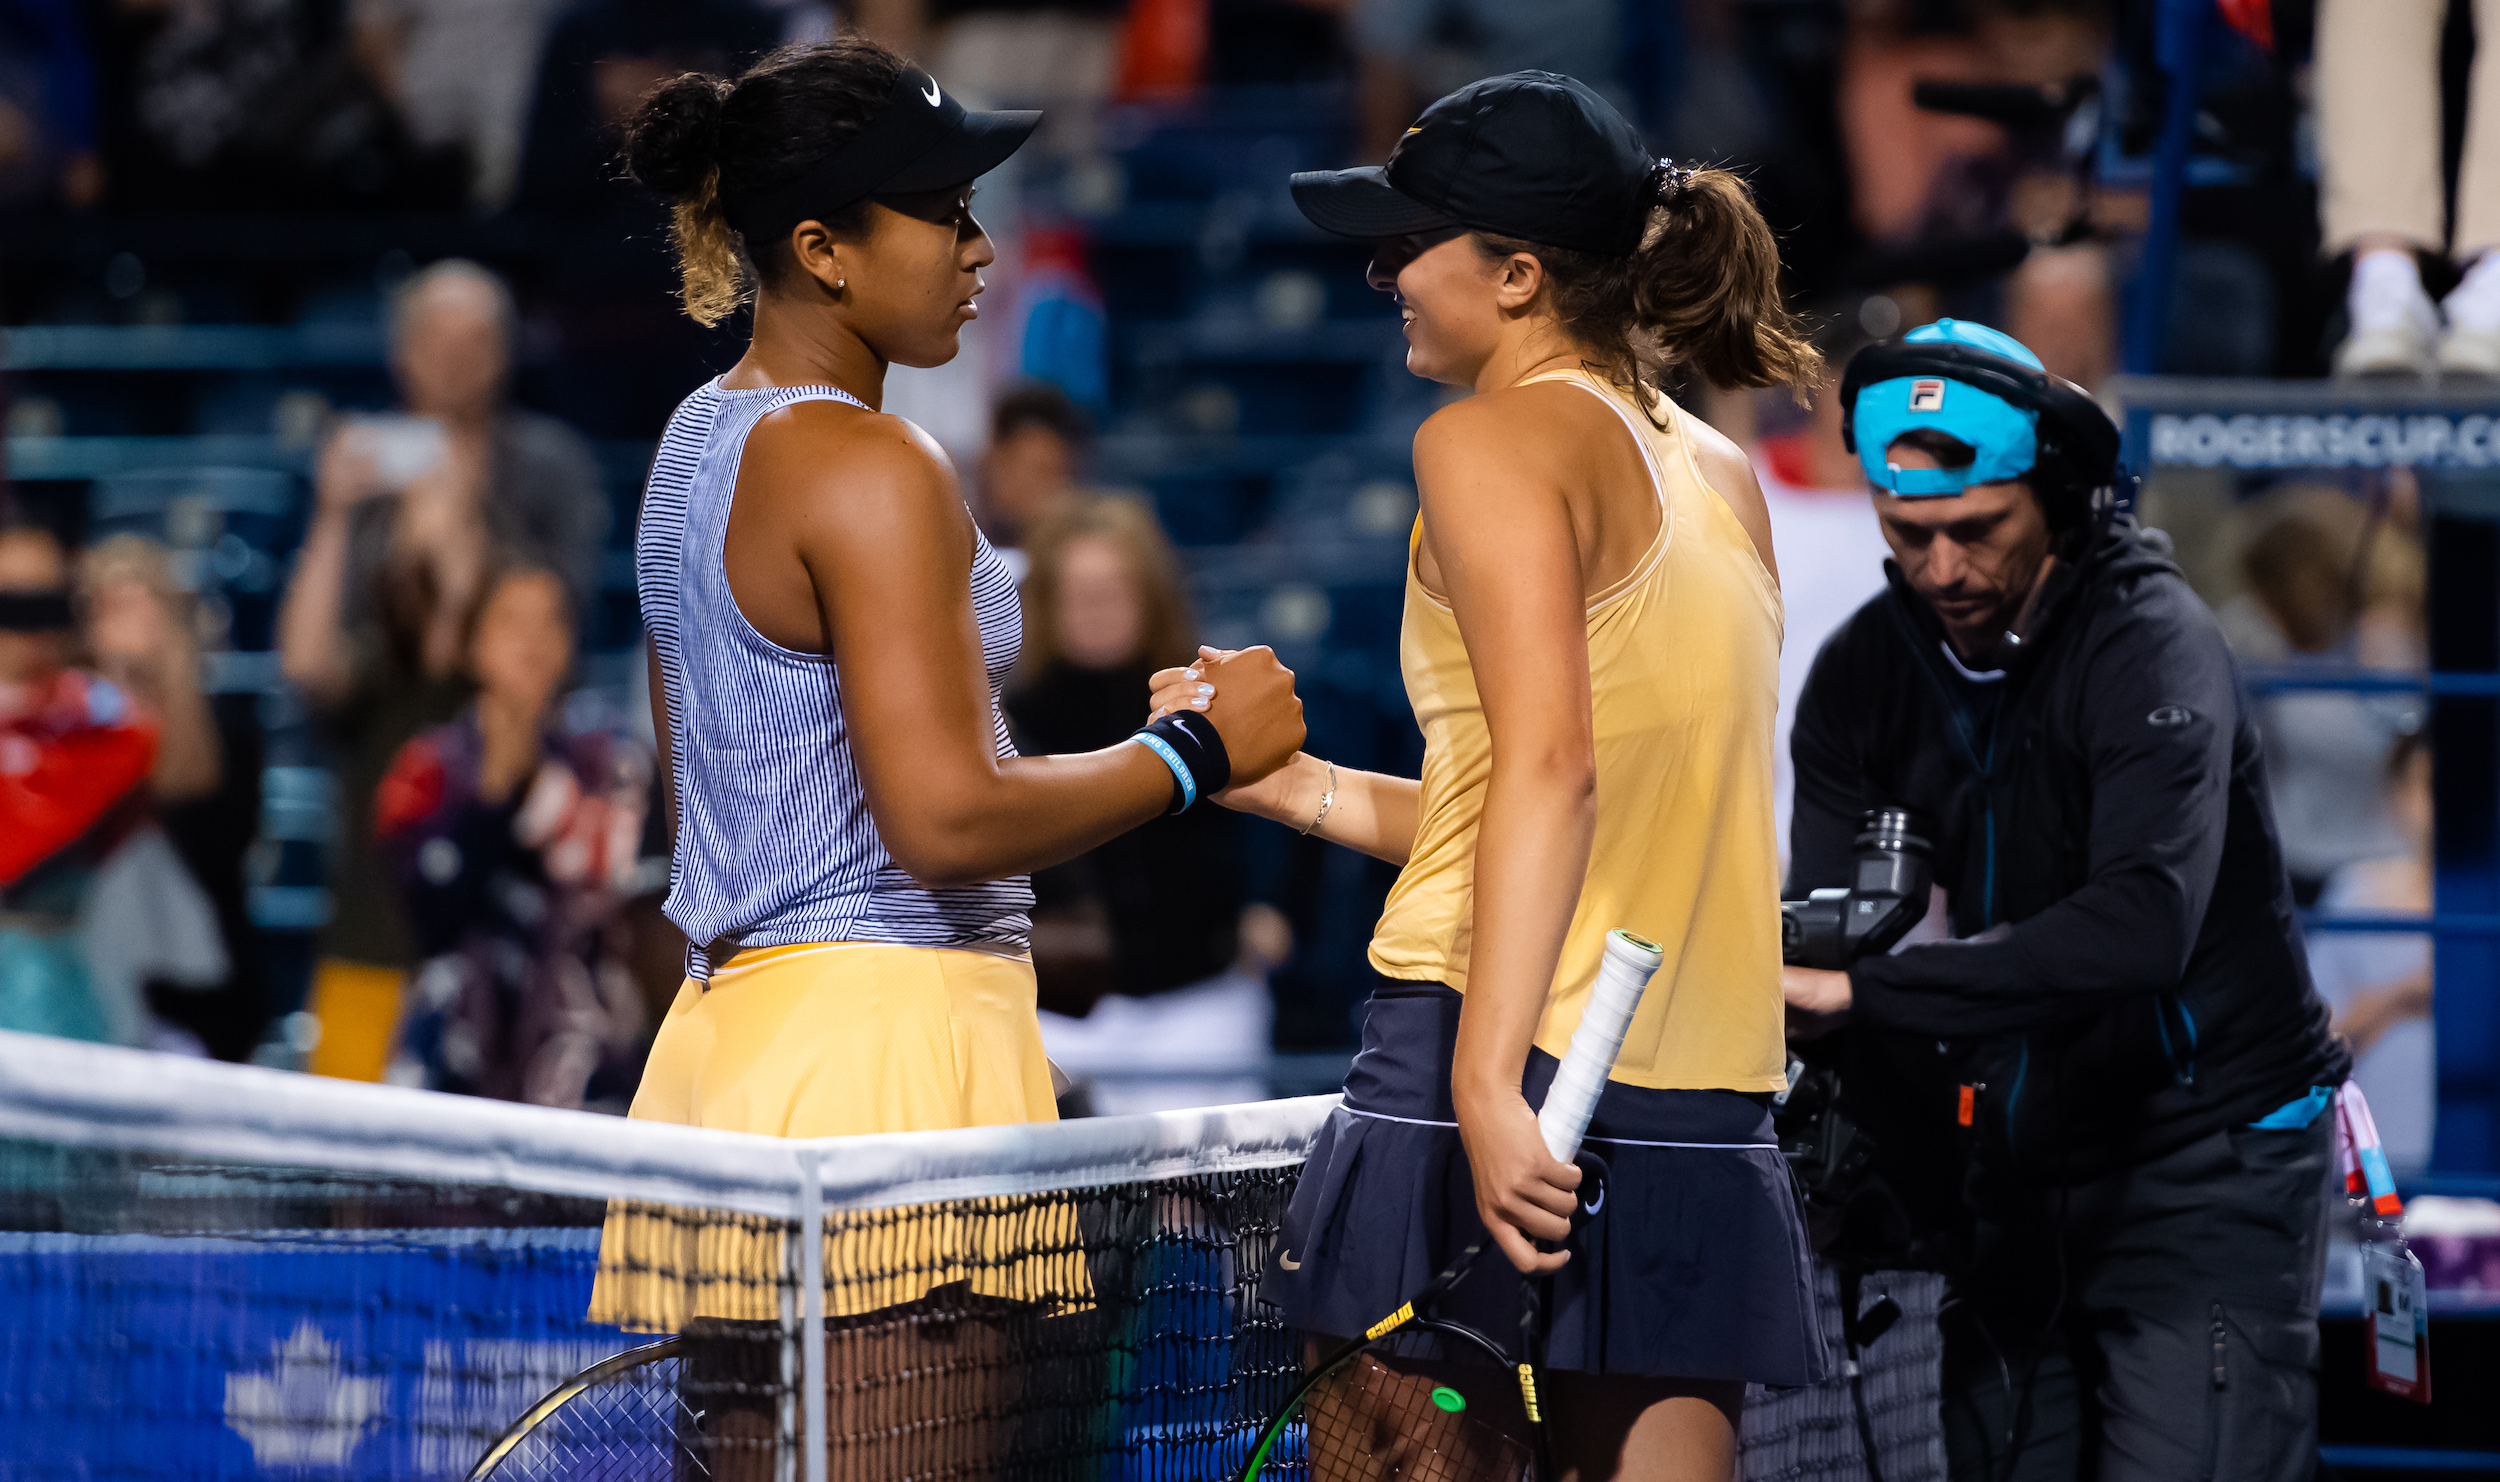 WTA Insider X: "Iga Swiatek vs. Naomi Osaka for the #MiamiOpen title. will be the first match since the two for the 1st time at 2019 Toronto. In the